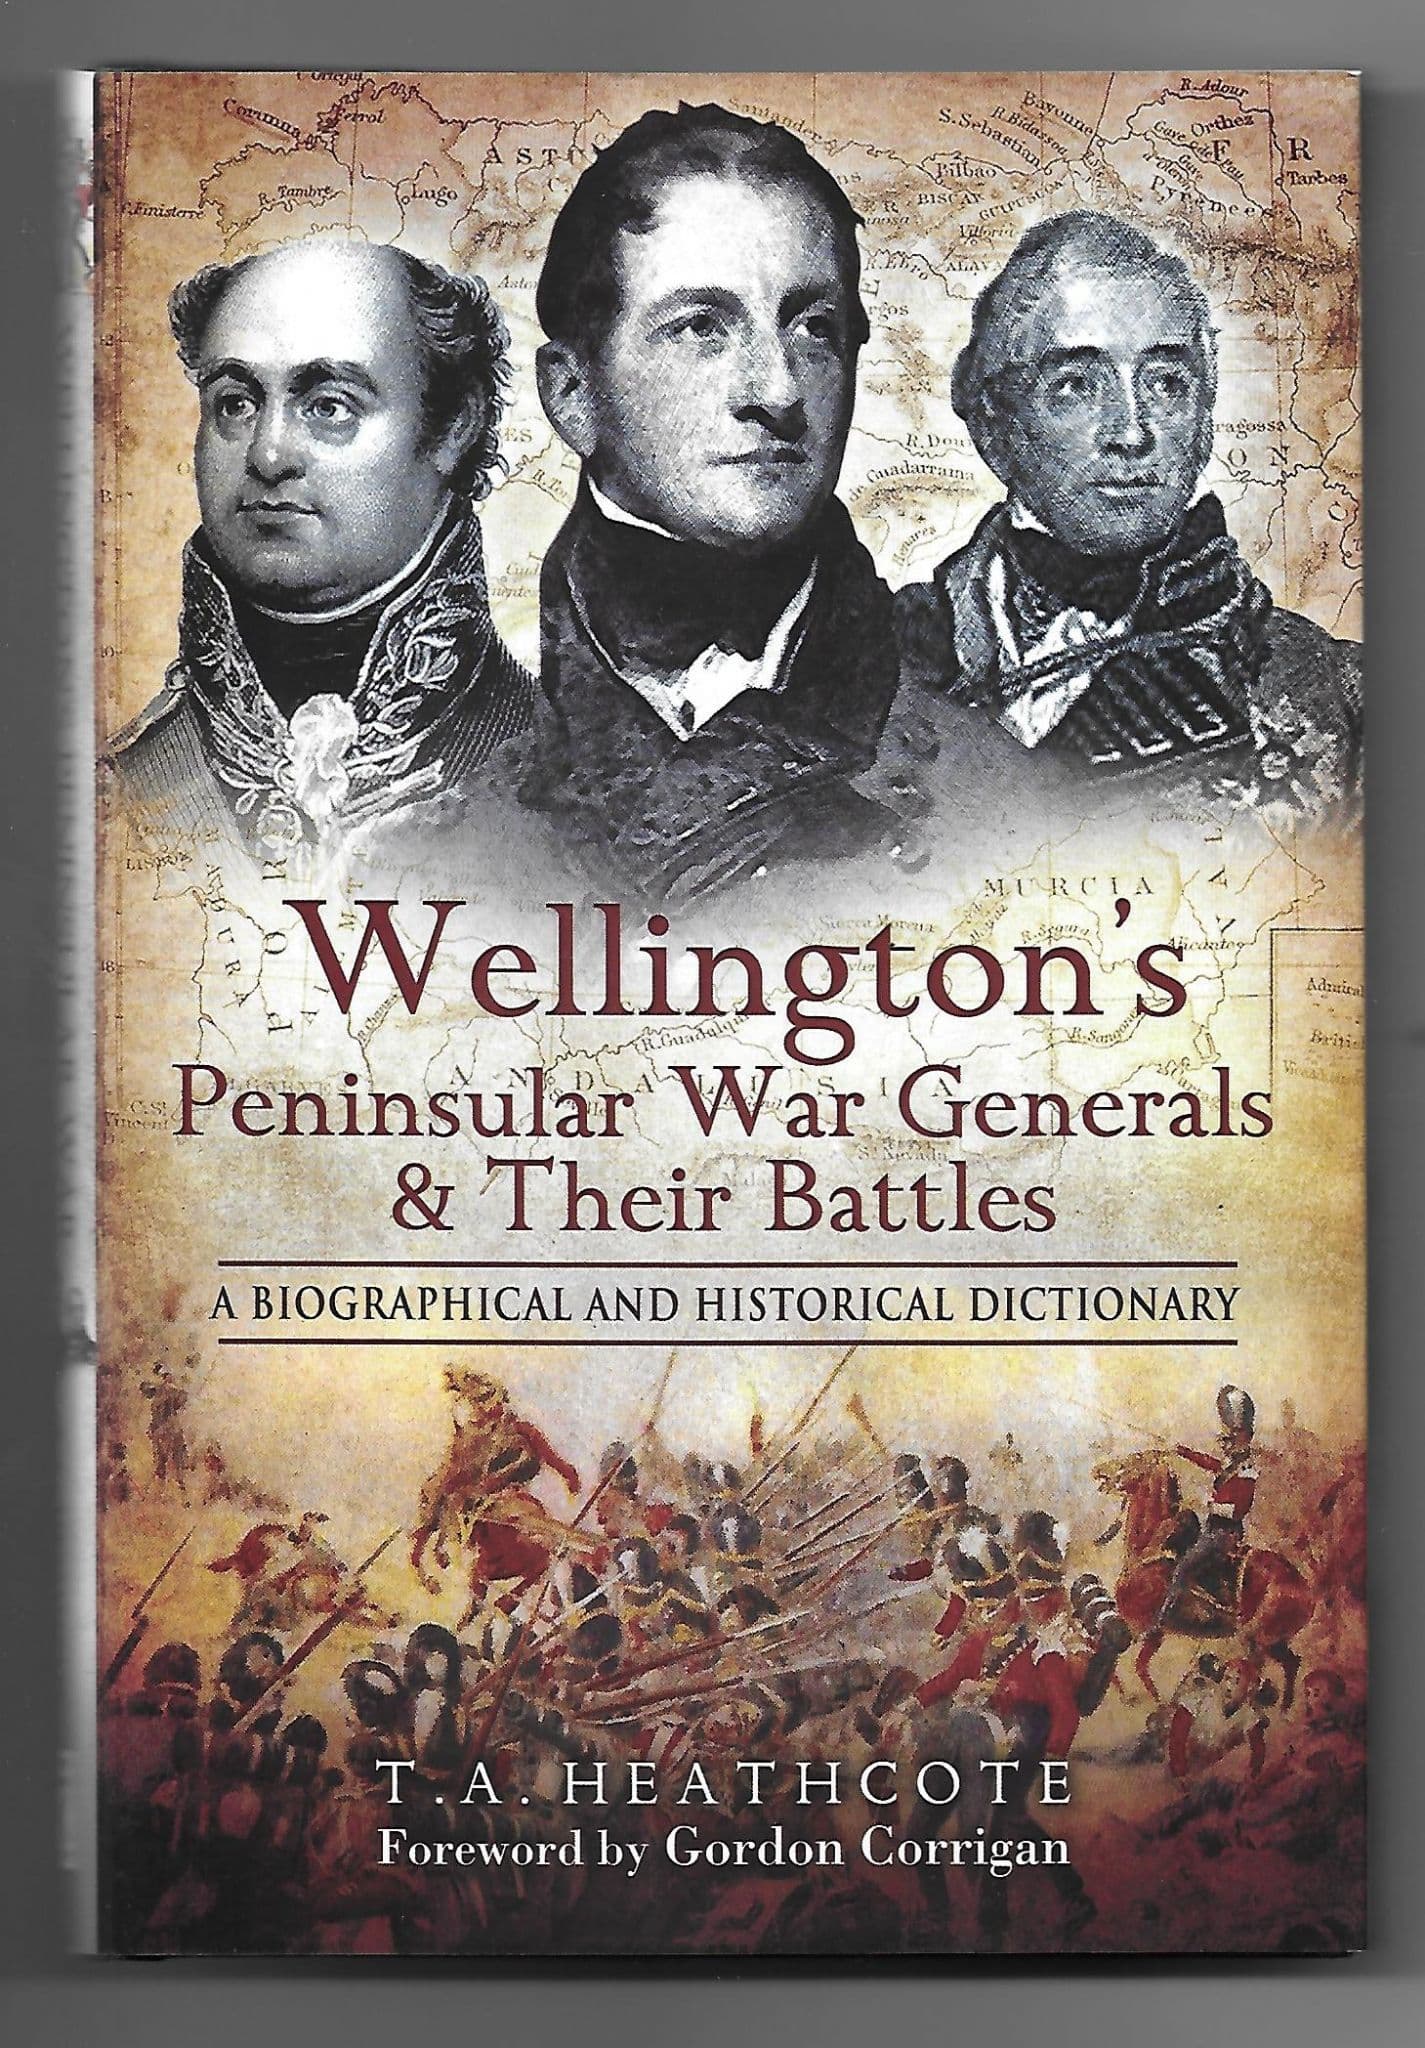 Wellington's Peninsula War Generals & Their Battles: A Biographical and Historical Dictionary